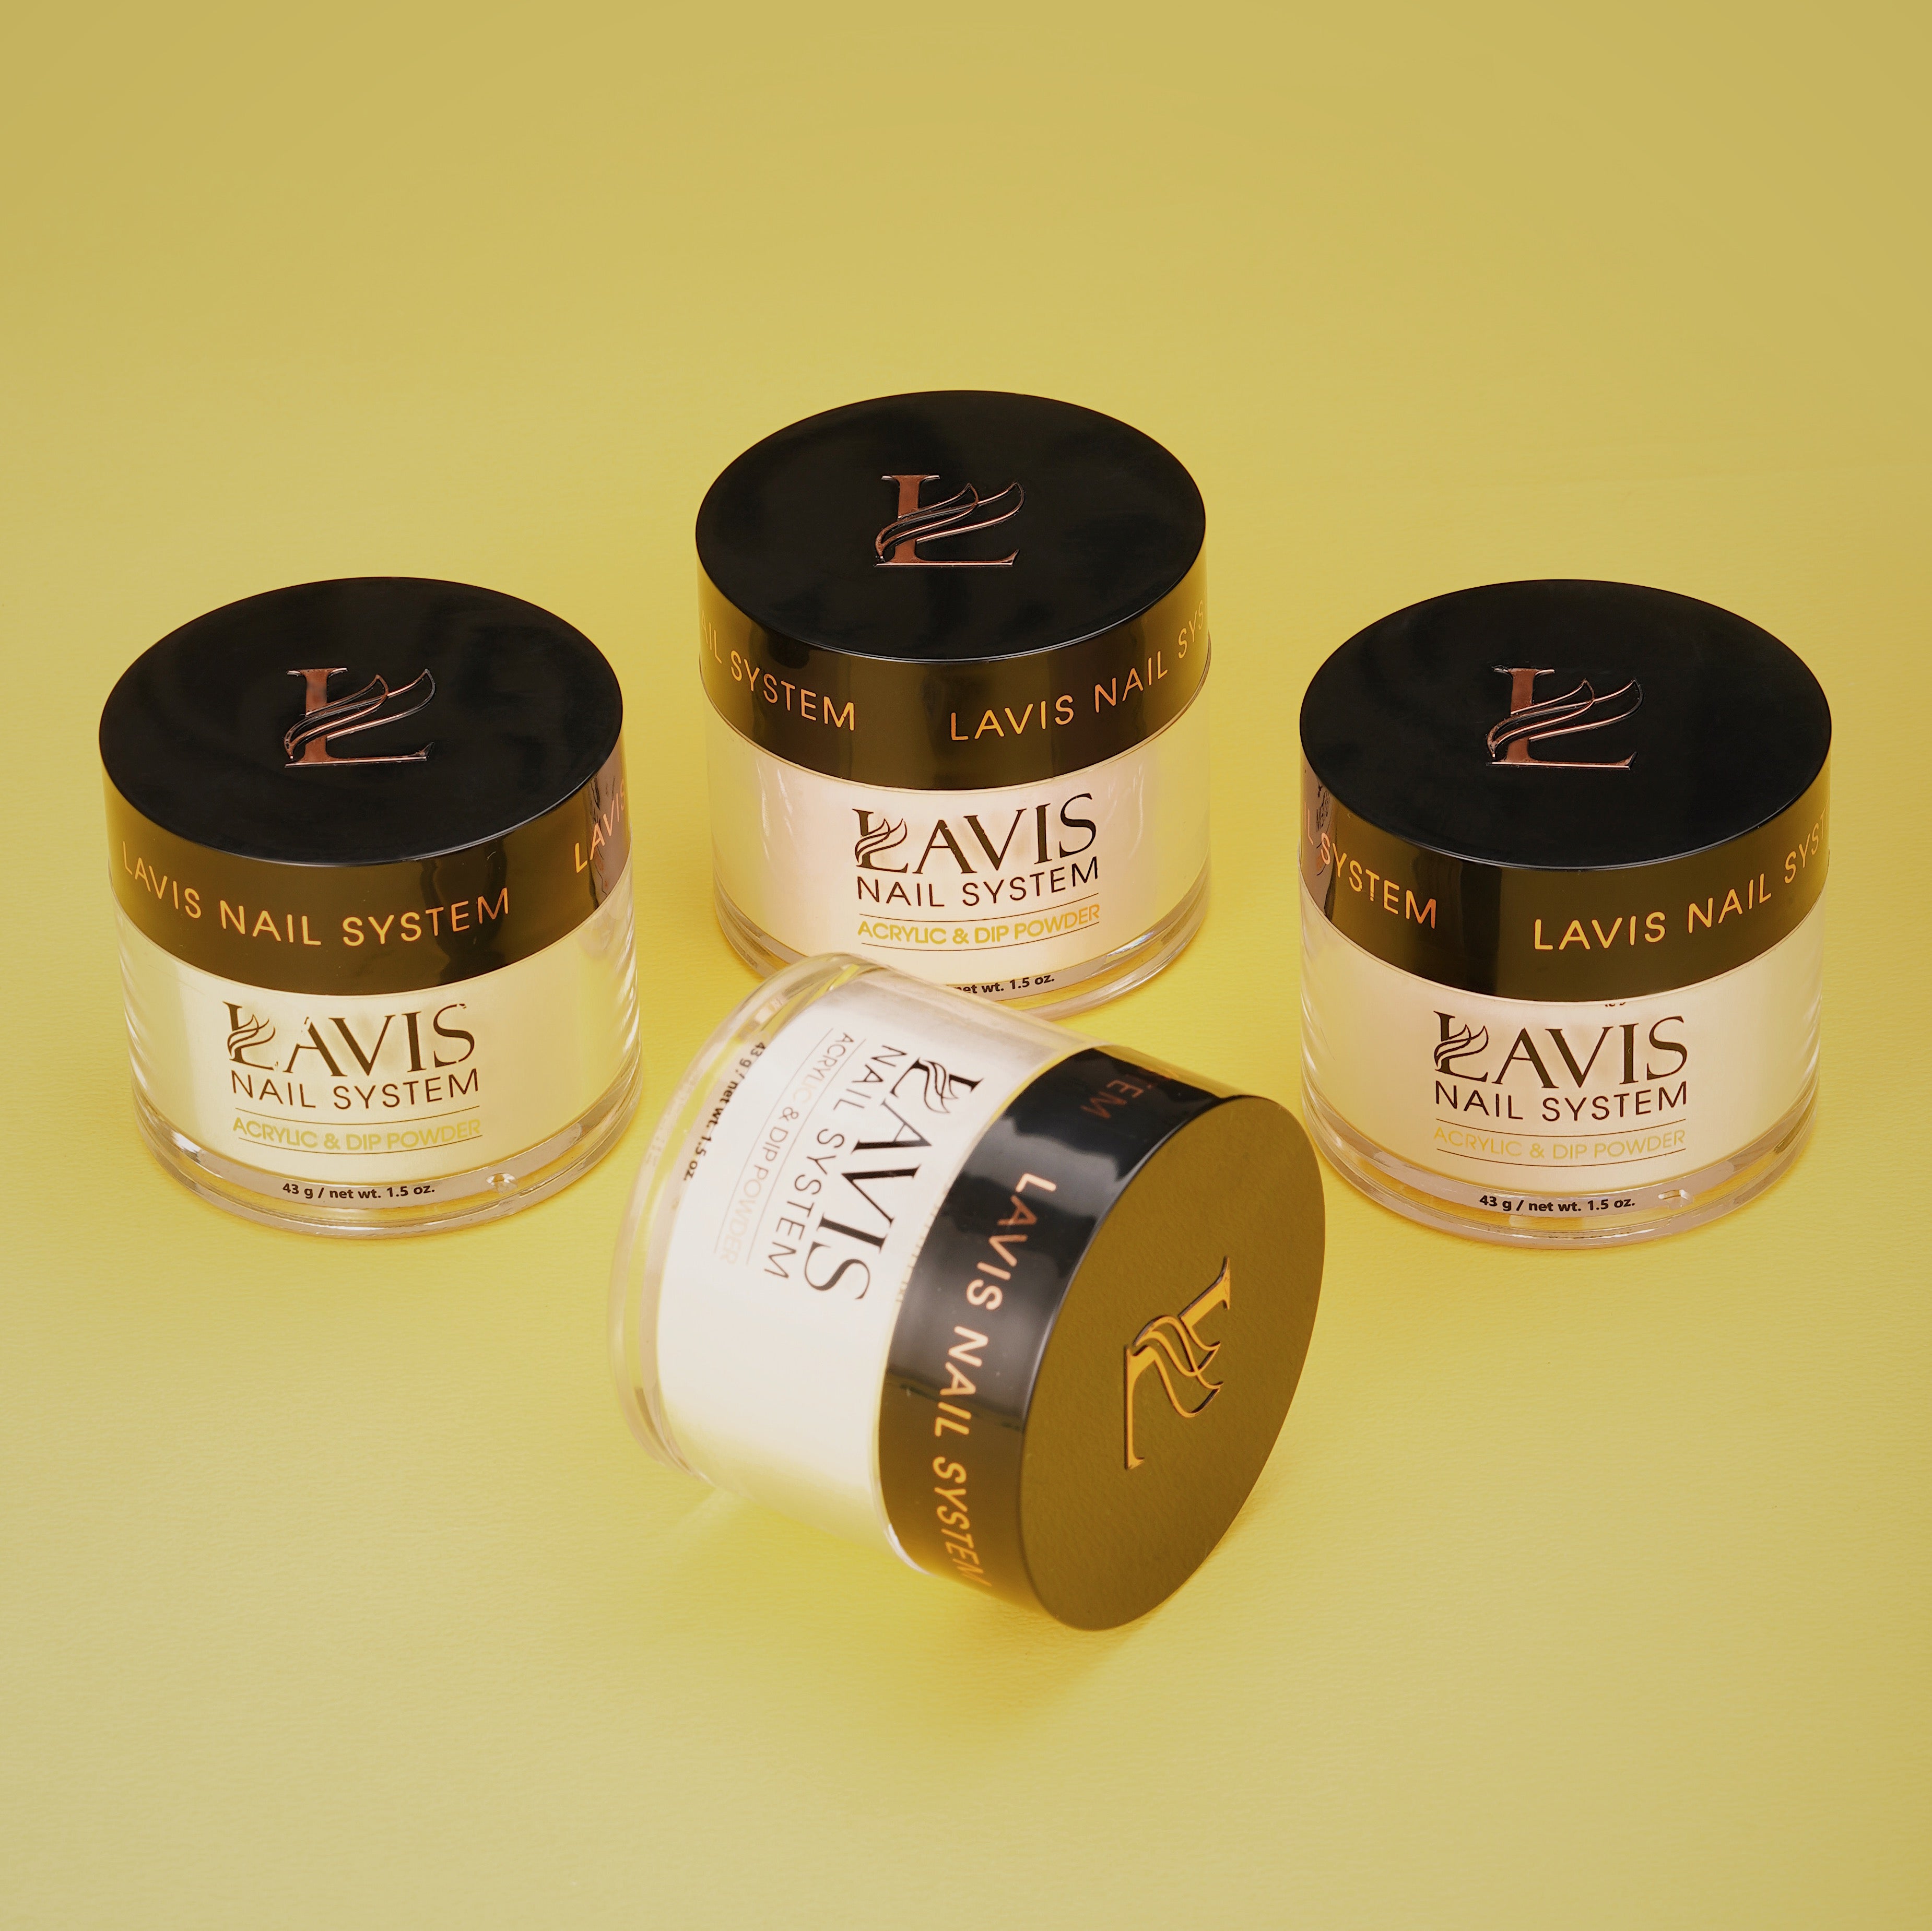 SWEET TALK - LAVIS Holiday Dipping Powder Collection: 002, 003, 004, 009, 022, 023, 068, 069, 078